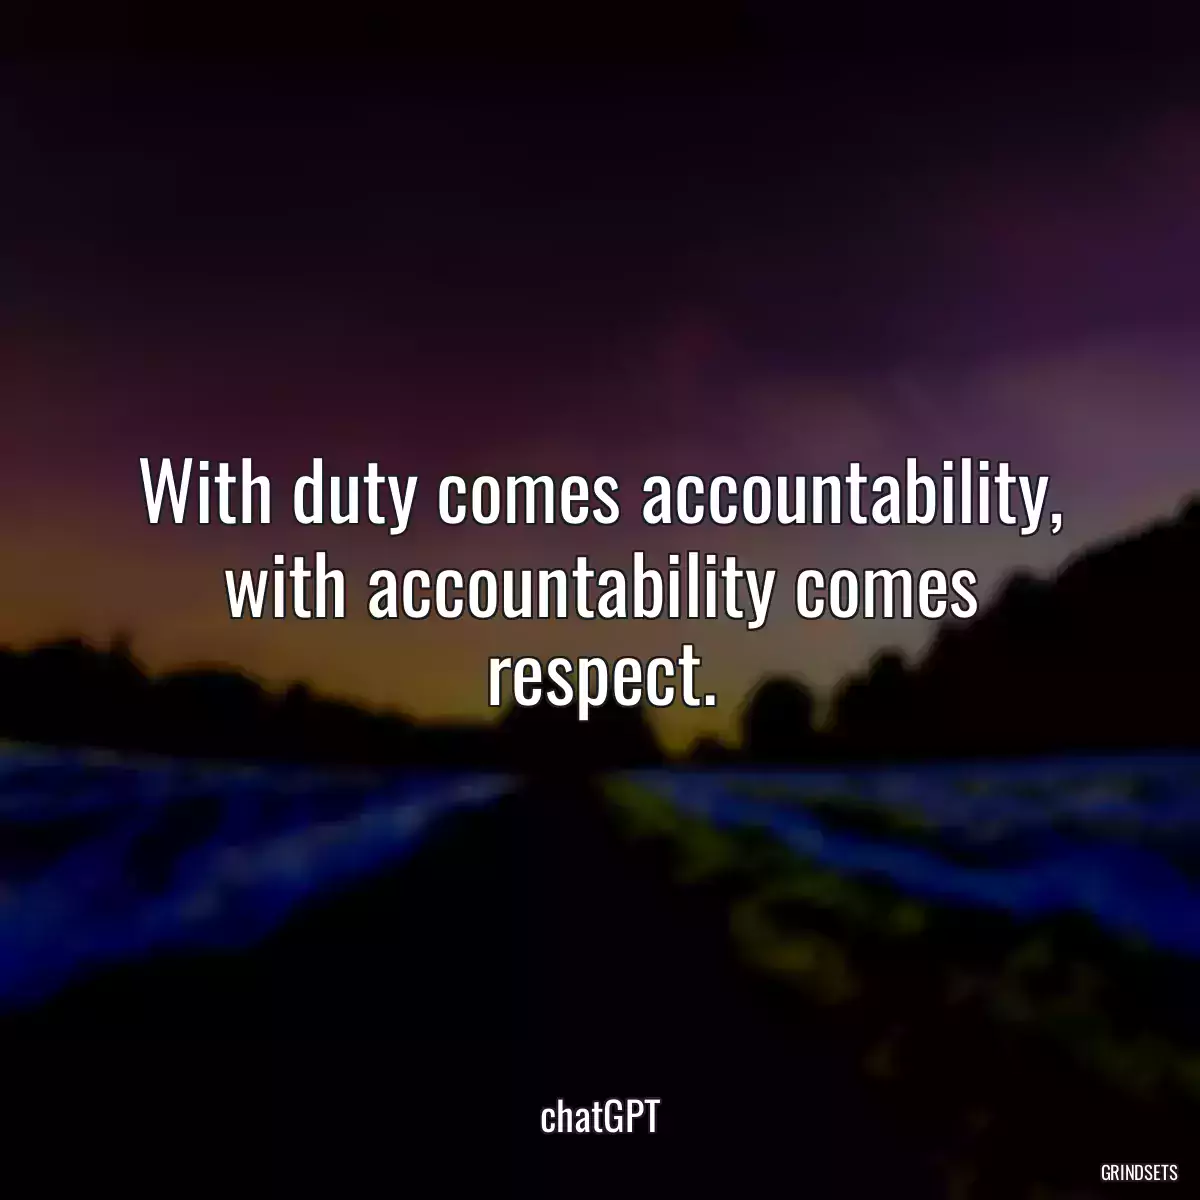 With duty comes accountability, with accountability comes respect.